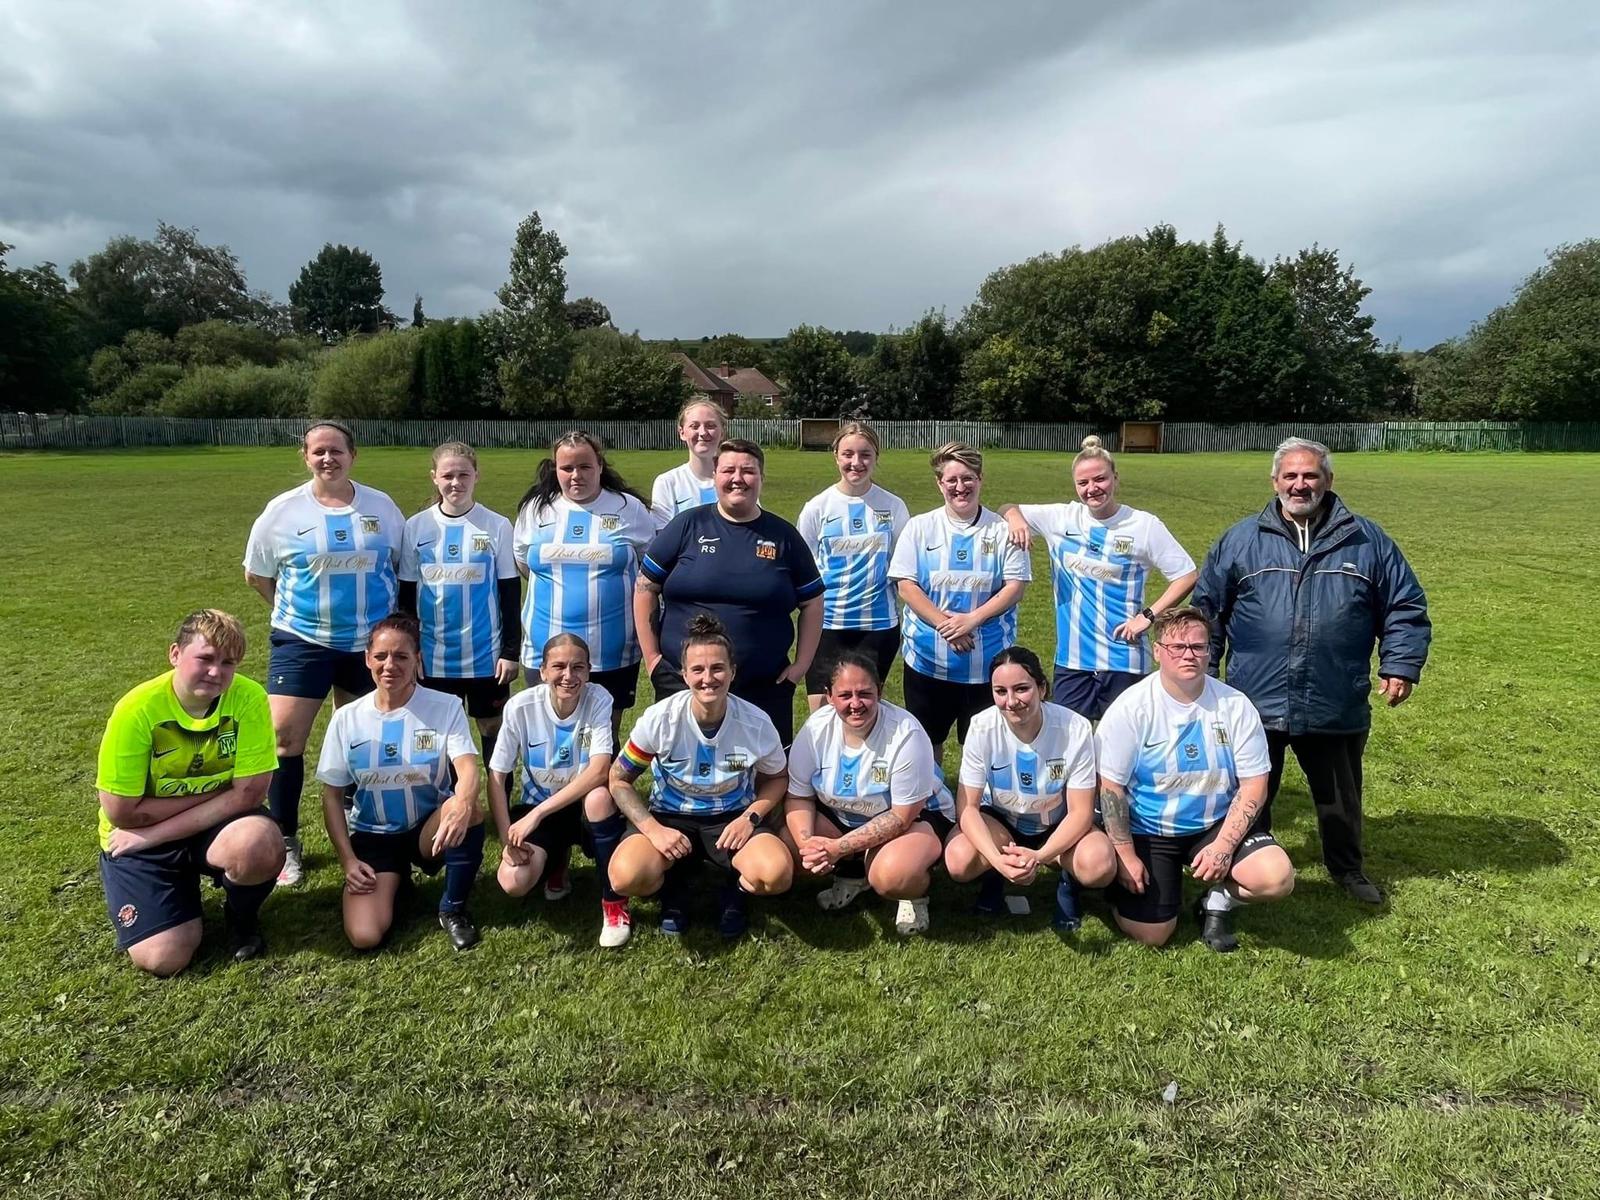 North Walkden Women's football club wants to strengthen squad with new players